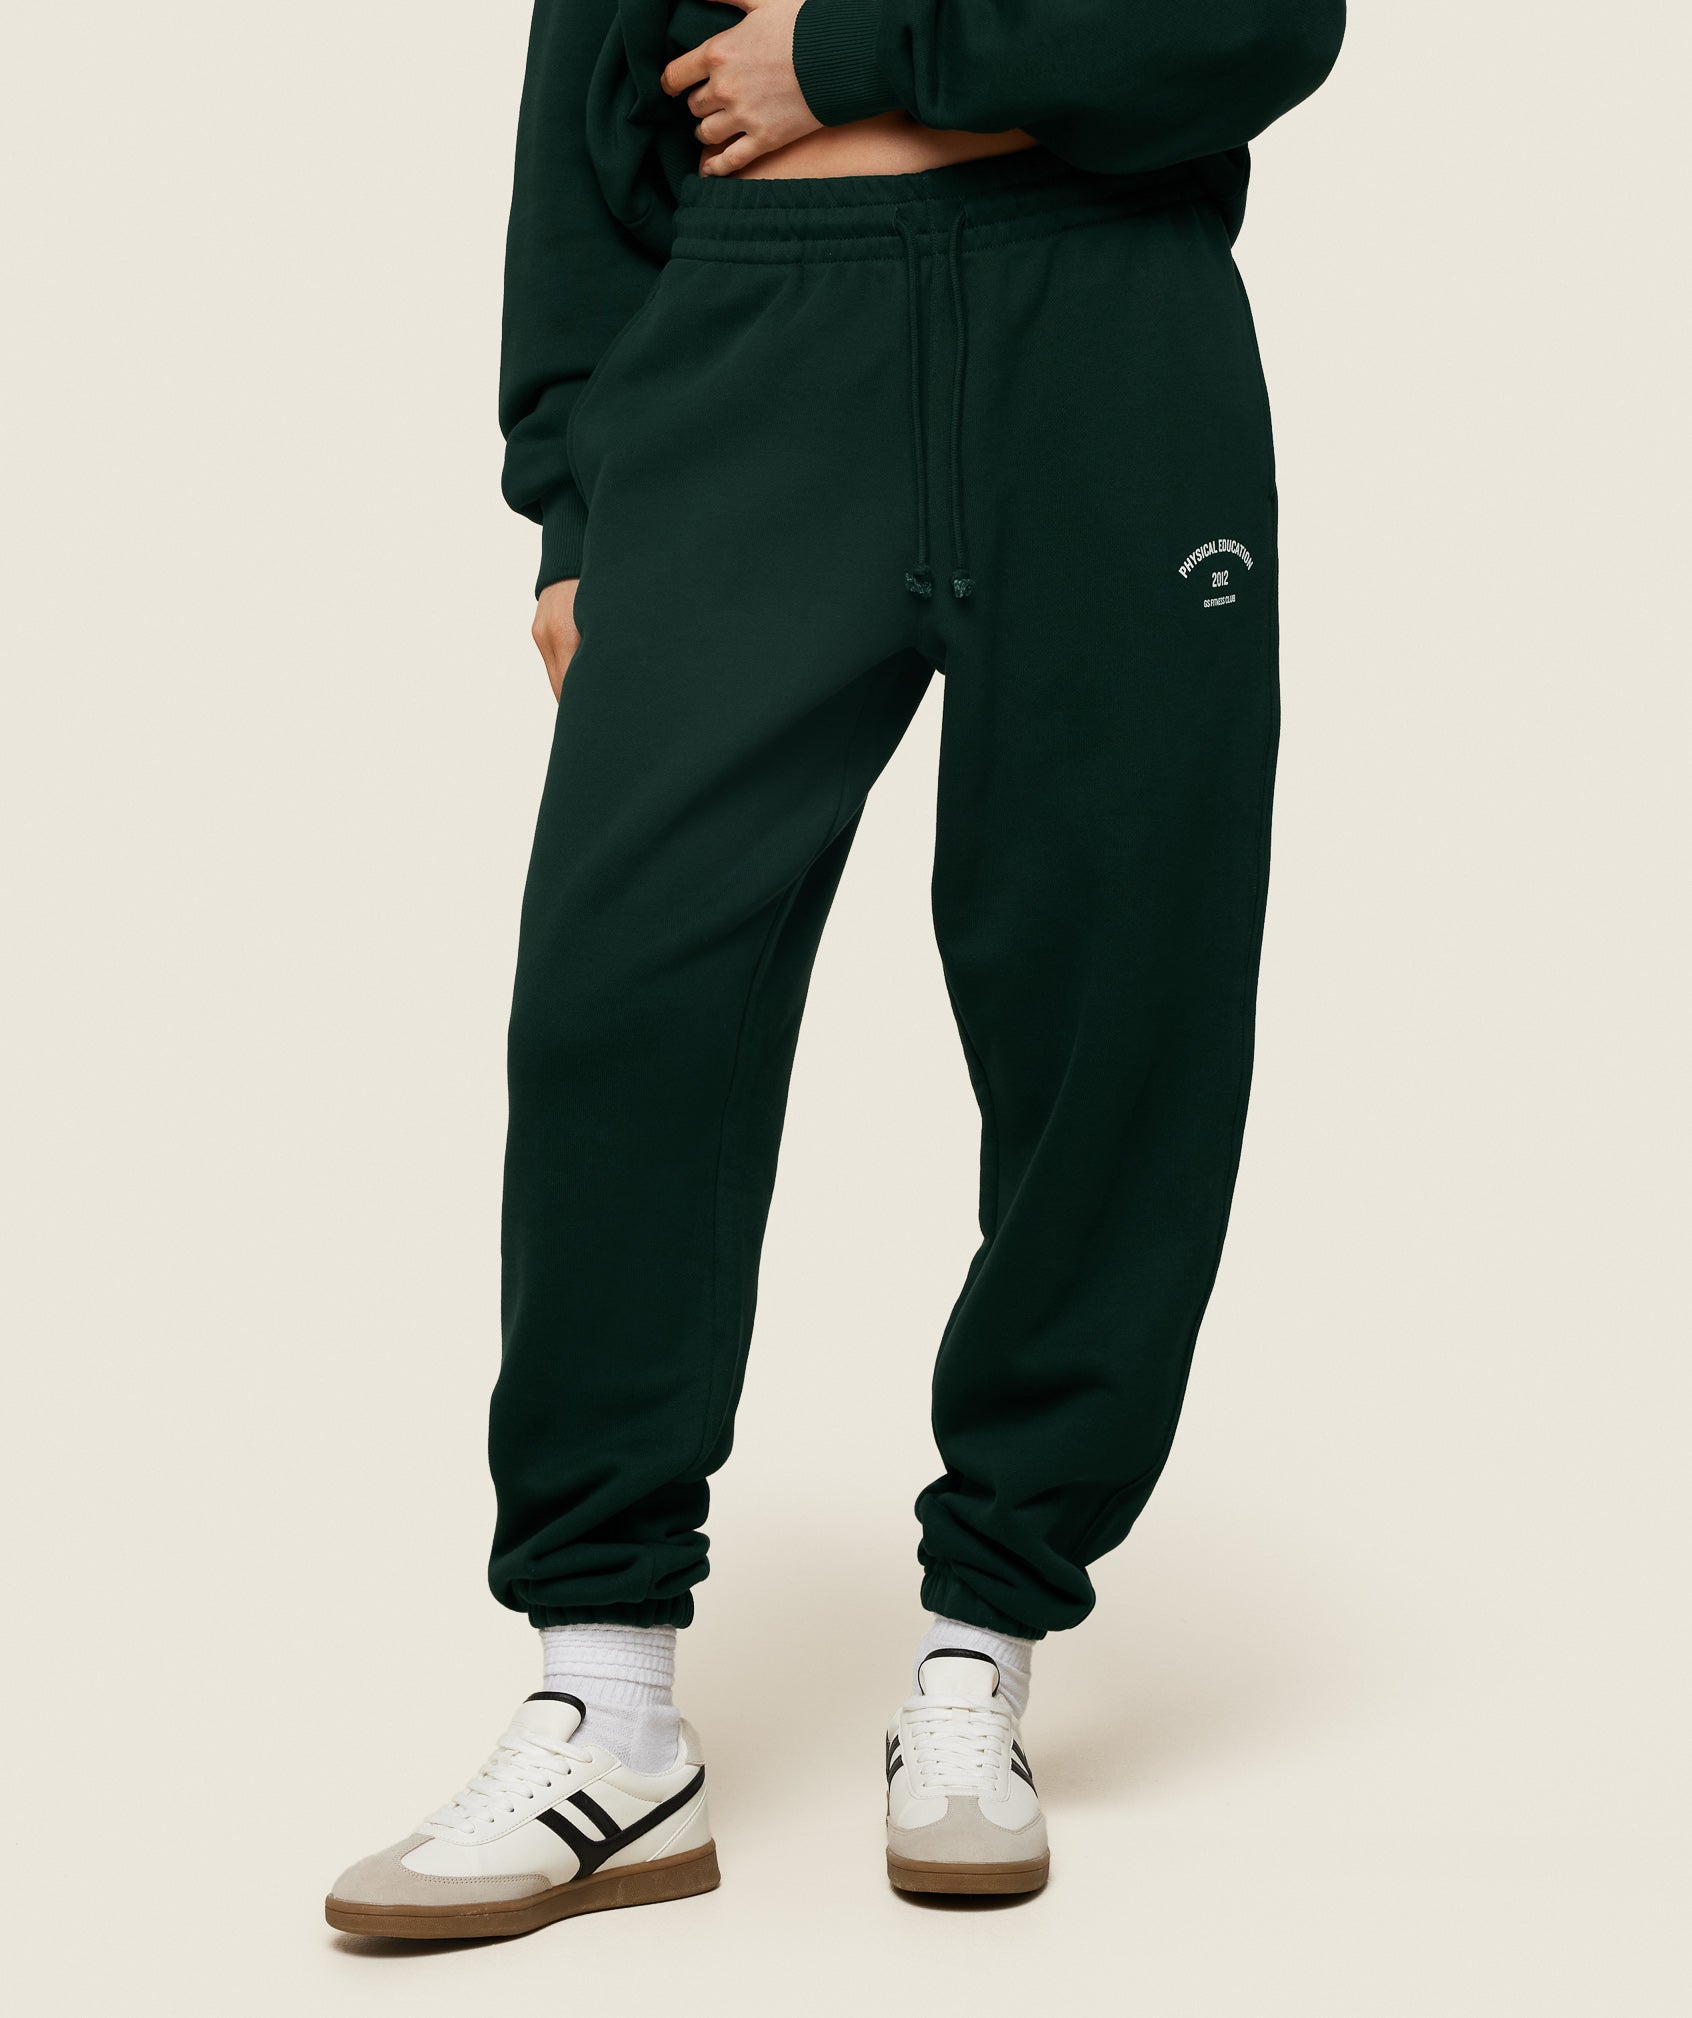 Phys Ed Graphic Sweatpants in Green